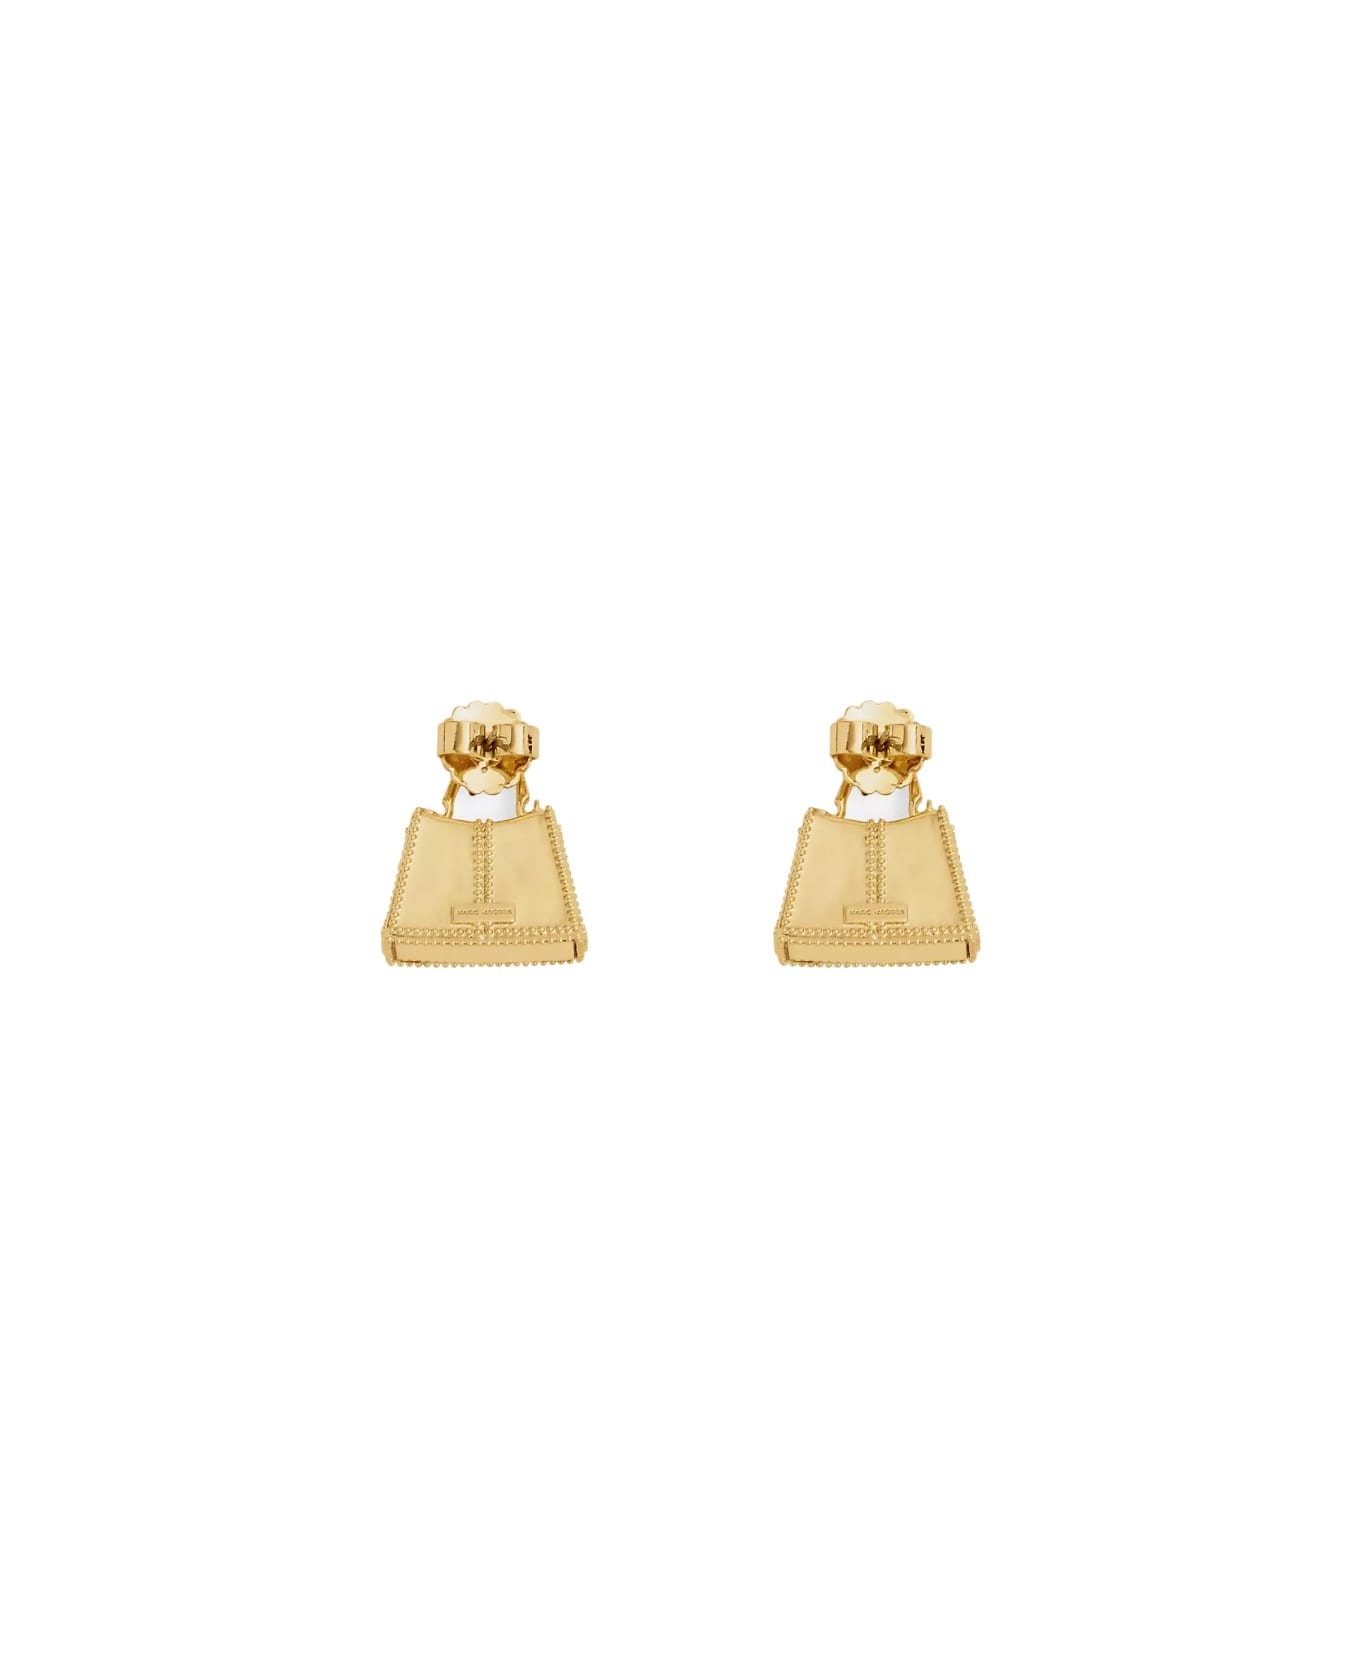 Marc Jacobs Earrings "st. Marc" - GOLD イヤリング